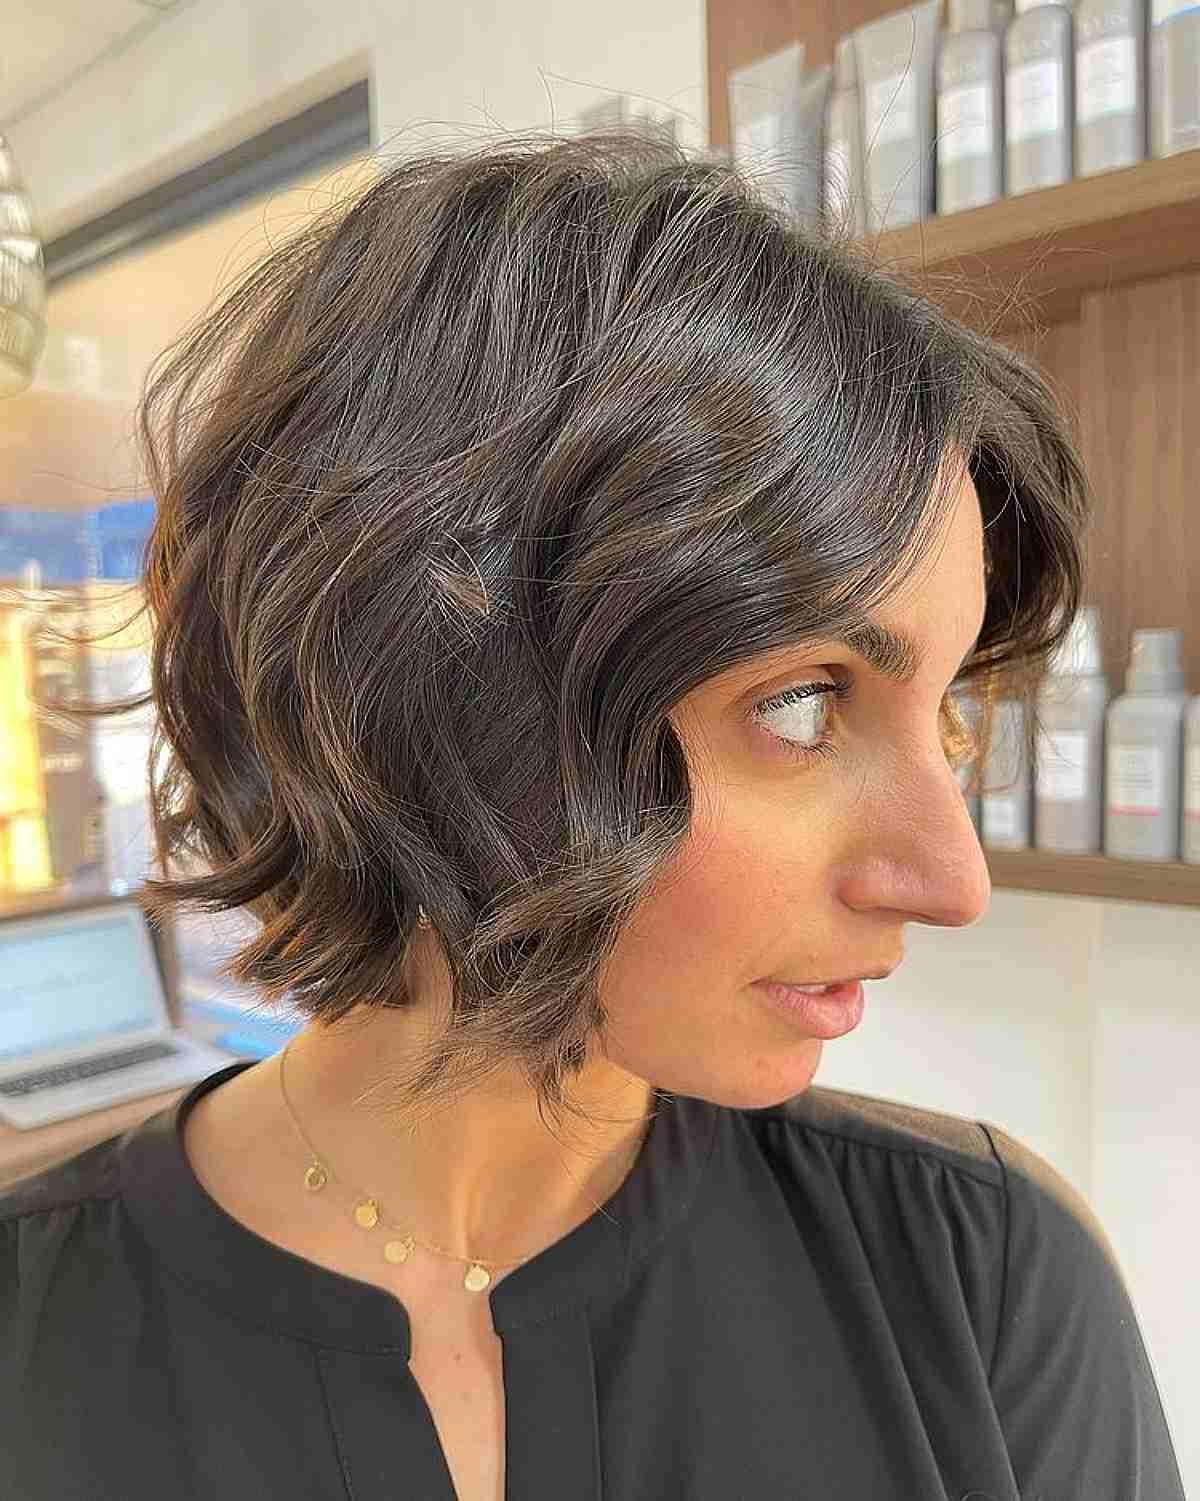 25 Short Wavy Bob Haircuts Trending Right Now Throughout Short Wavy Bob Hairstyles (View 2 of 20)